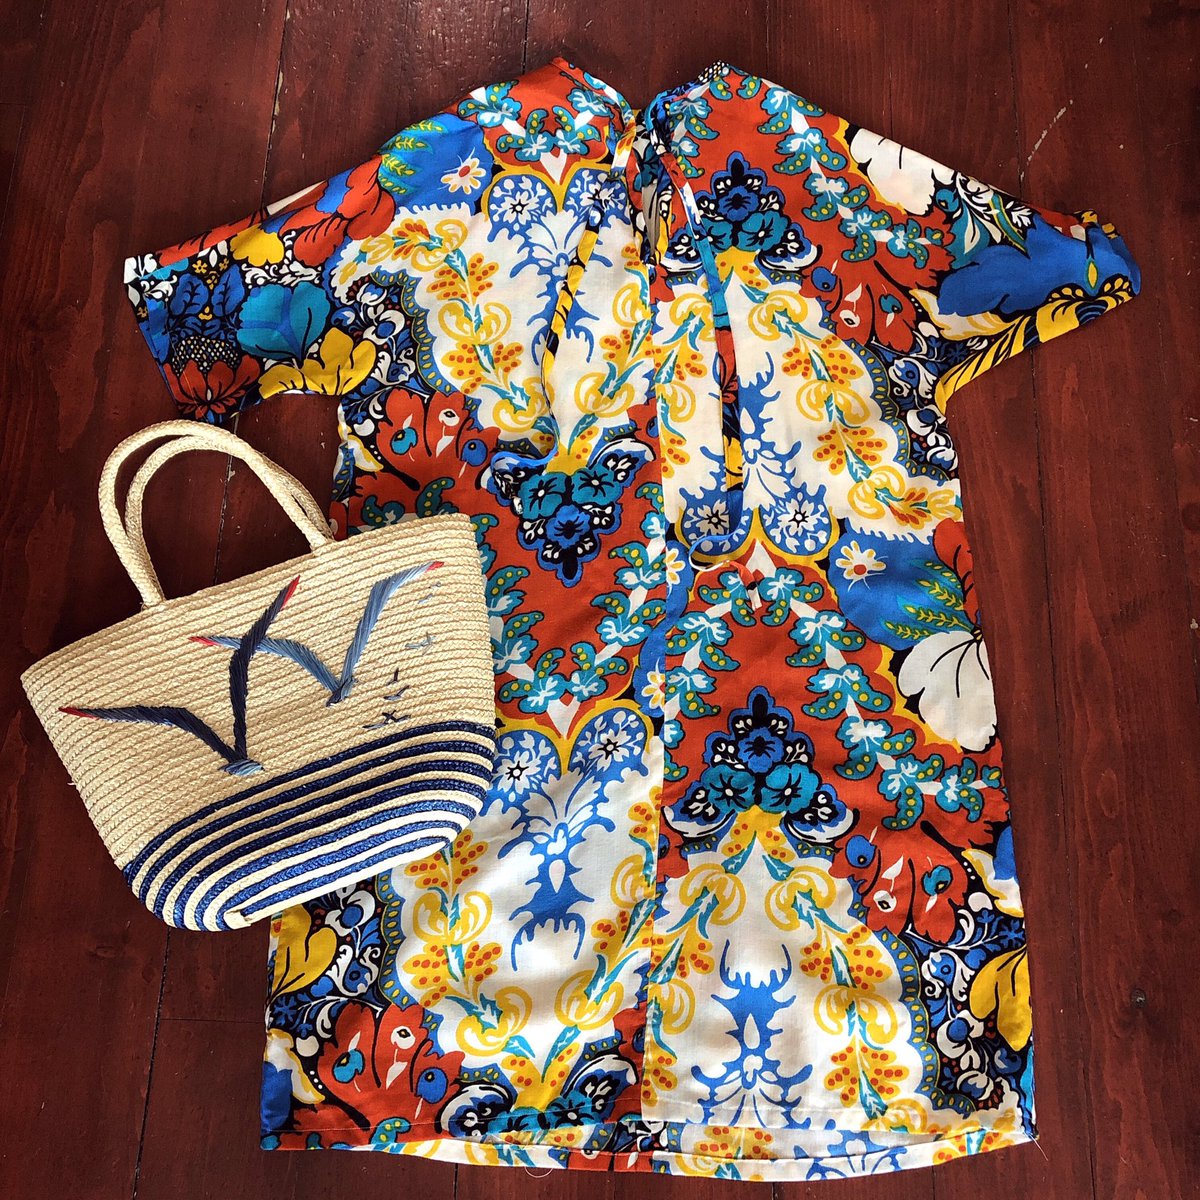 Looking for a colourful frock for the beach or around the pool? Here’s some inspiration for you!

#vintagebeachwear #vintagecoverup #summervintage #longweekendwear #poolwear #vintagefashion #strawbag